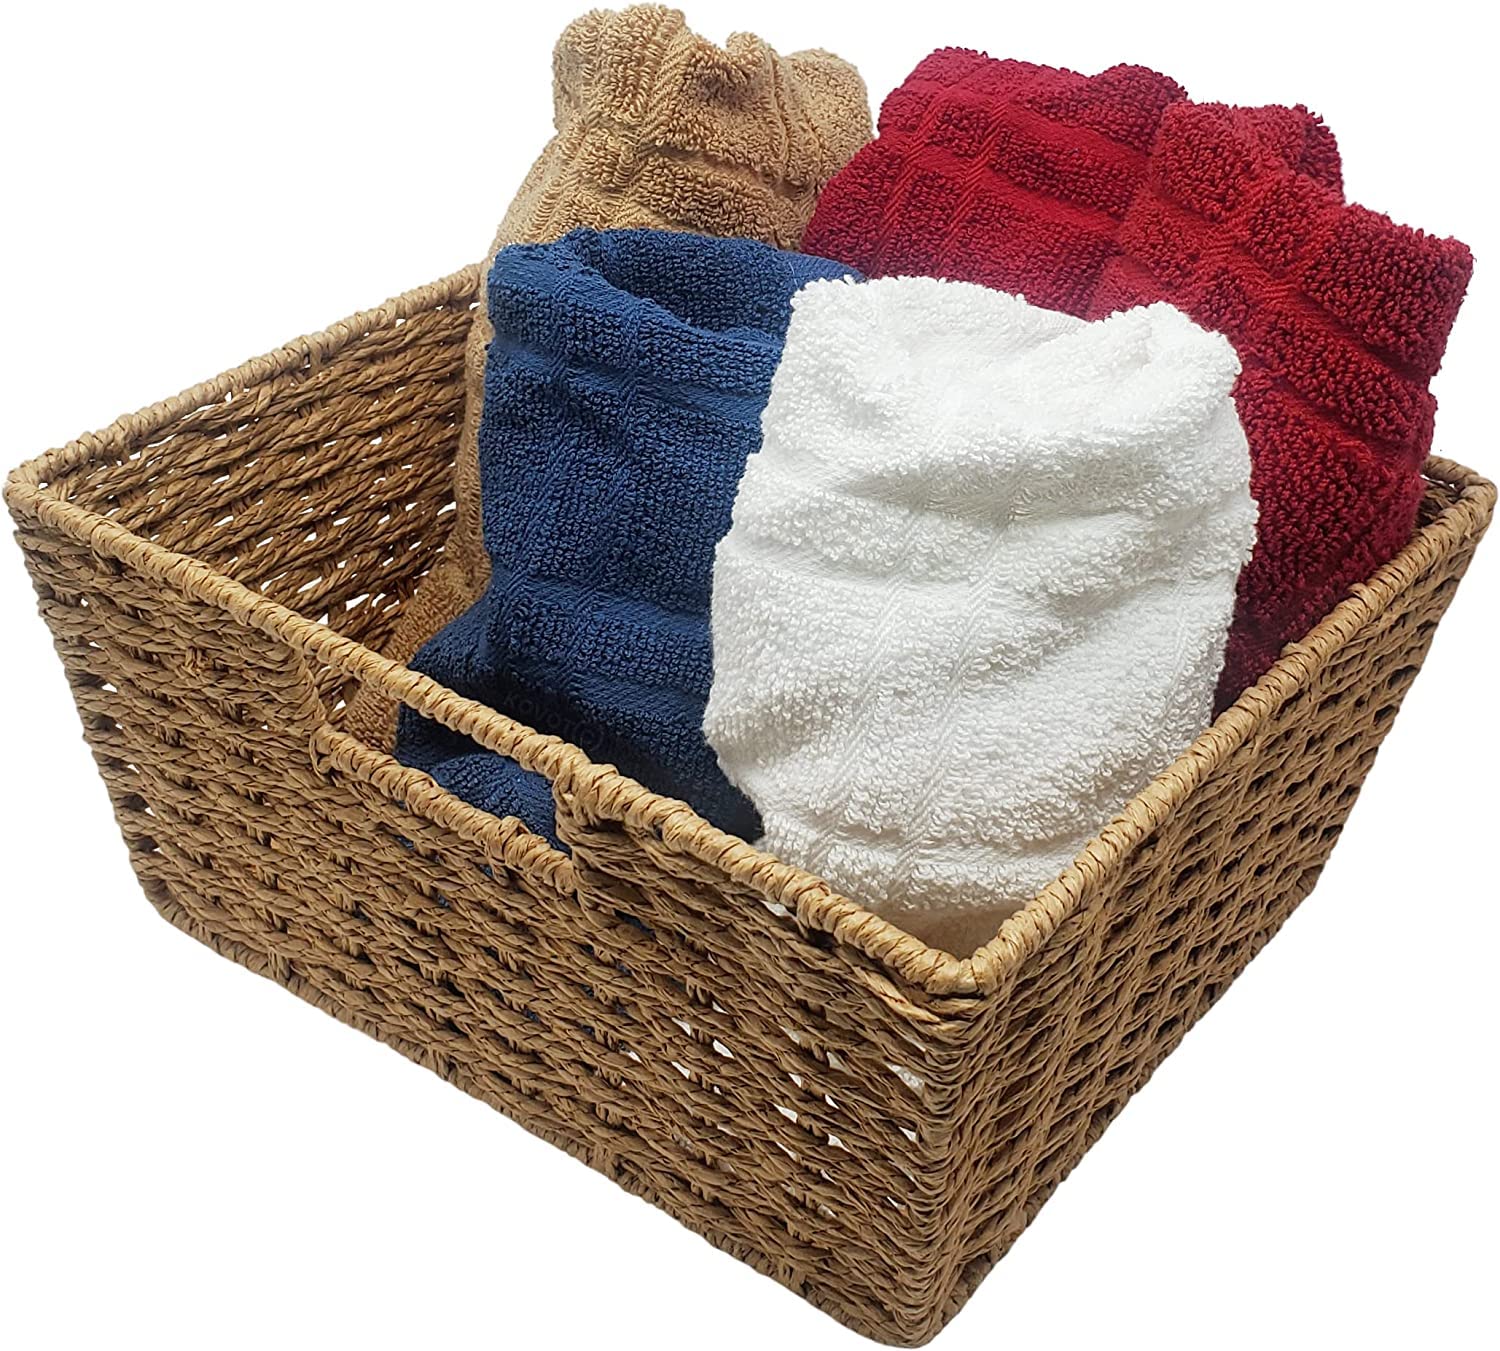 Kovot Woven Wicker Storage Baskets with Built-in Carry Handles - 9.75" L x 8.5" W x 4.5" H (2-Pack)